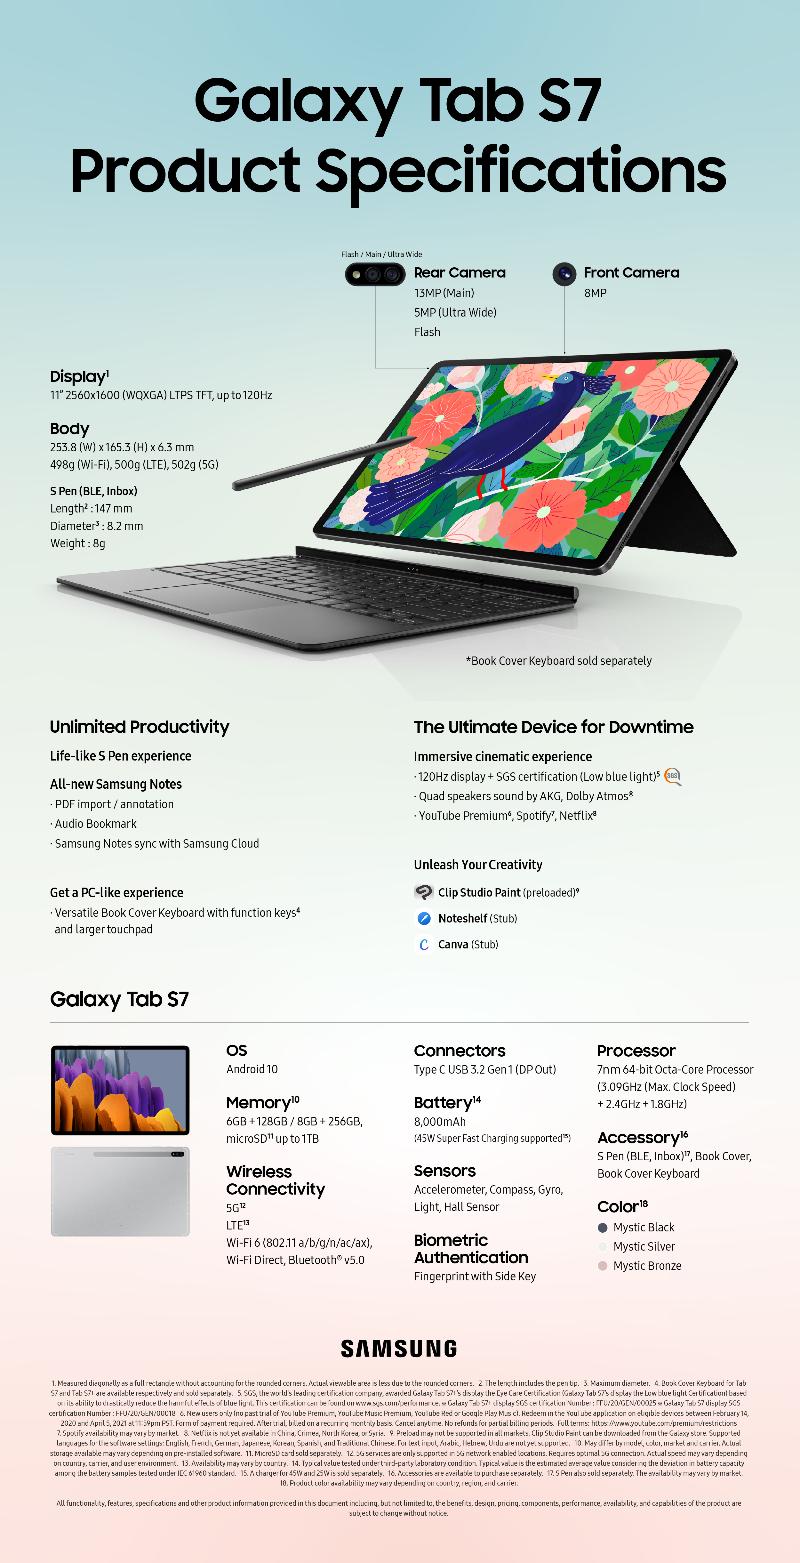 galaxytabs7_product_specifications_final-3.jpg